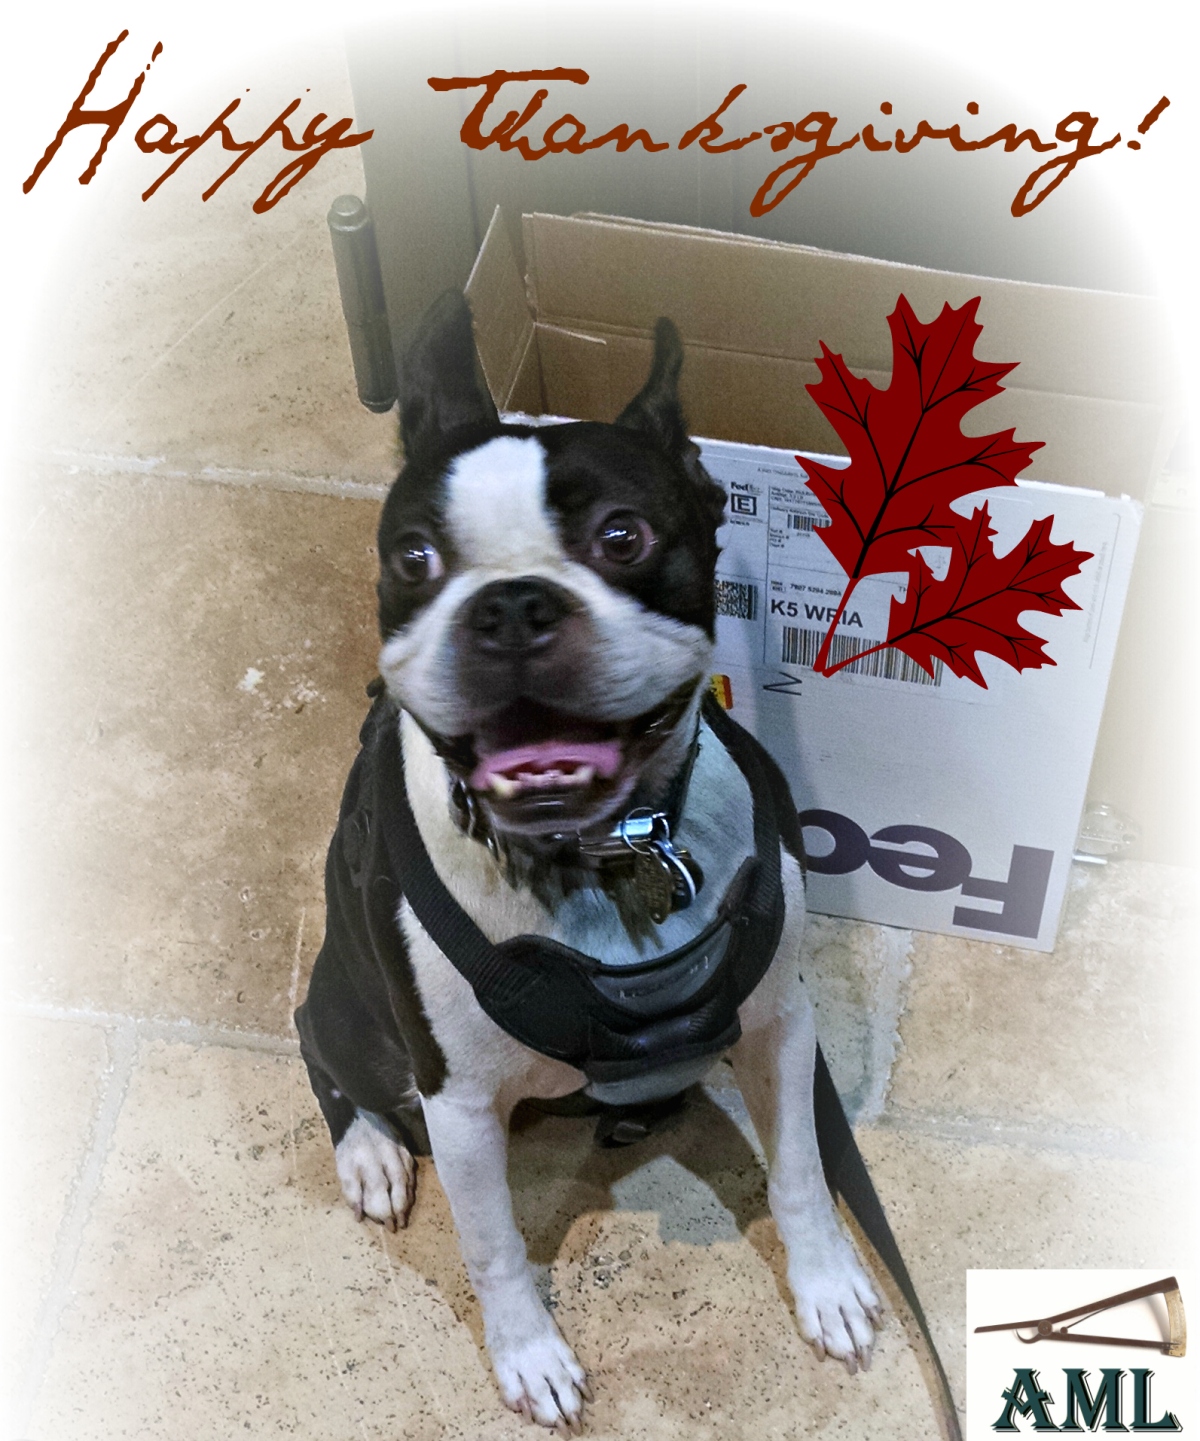 Happy Thanksgiving from AML!